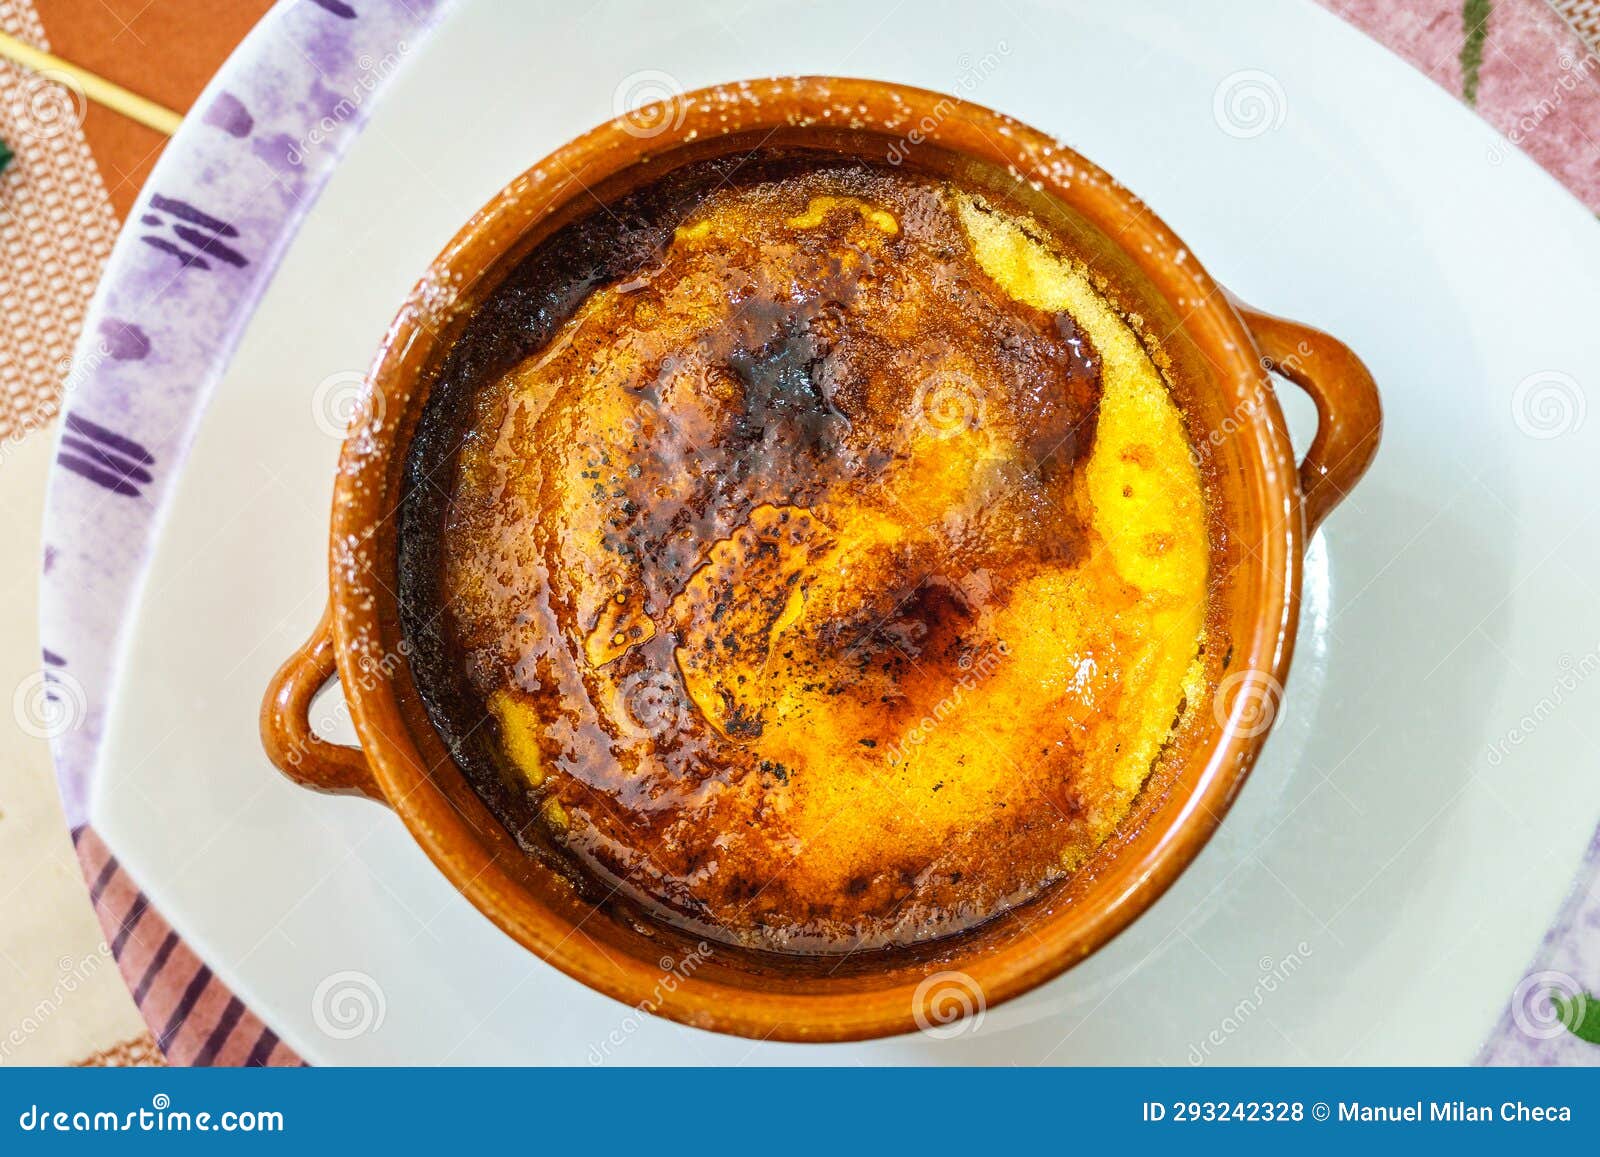 crema catalana, typical dessert from catalonia, spain. it is the best known catalan dessert, made with a base of milk, eggs and